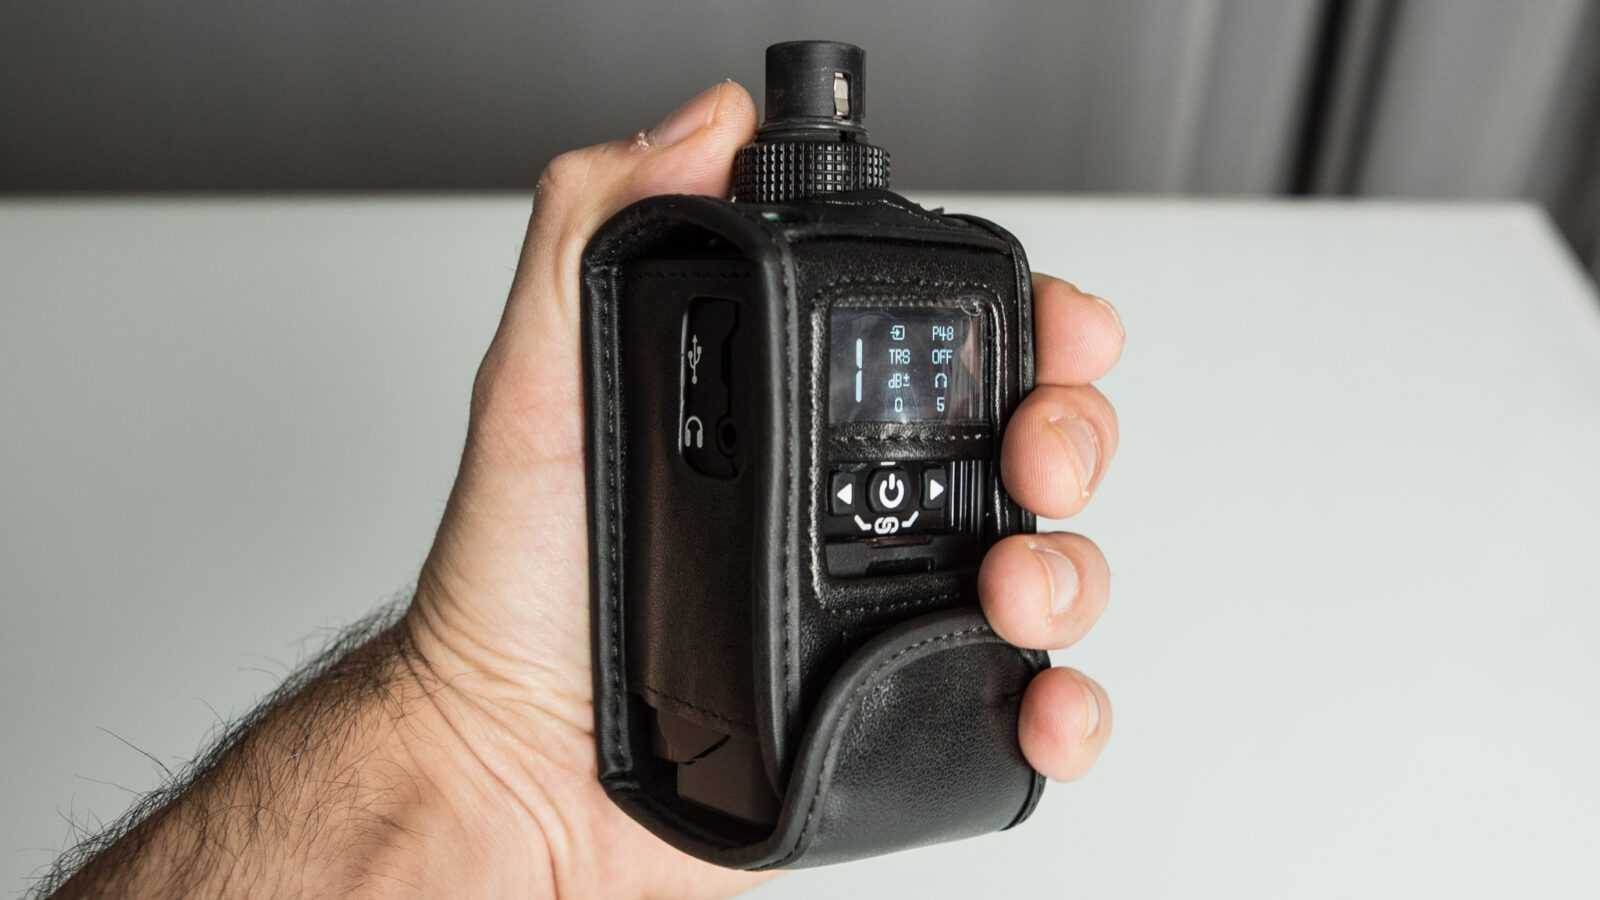 RØDE announced a dual transmitter version of the Wireless ME - Newsshooter